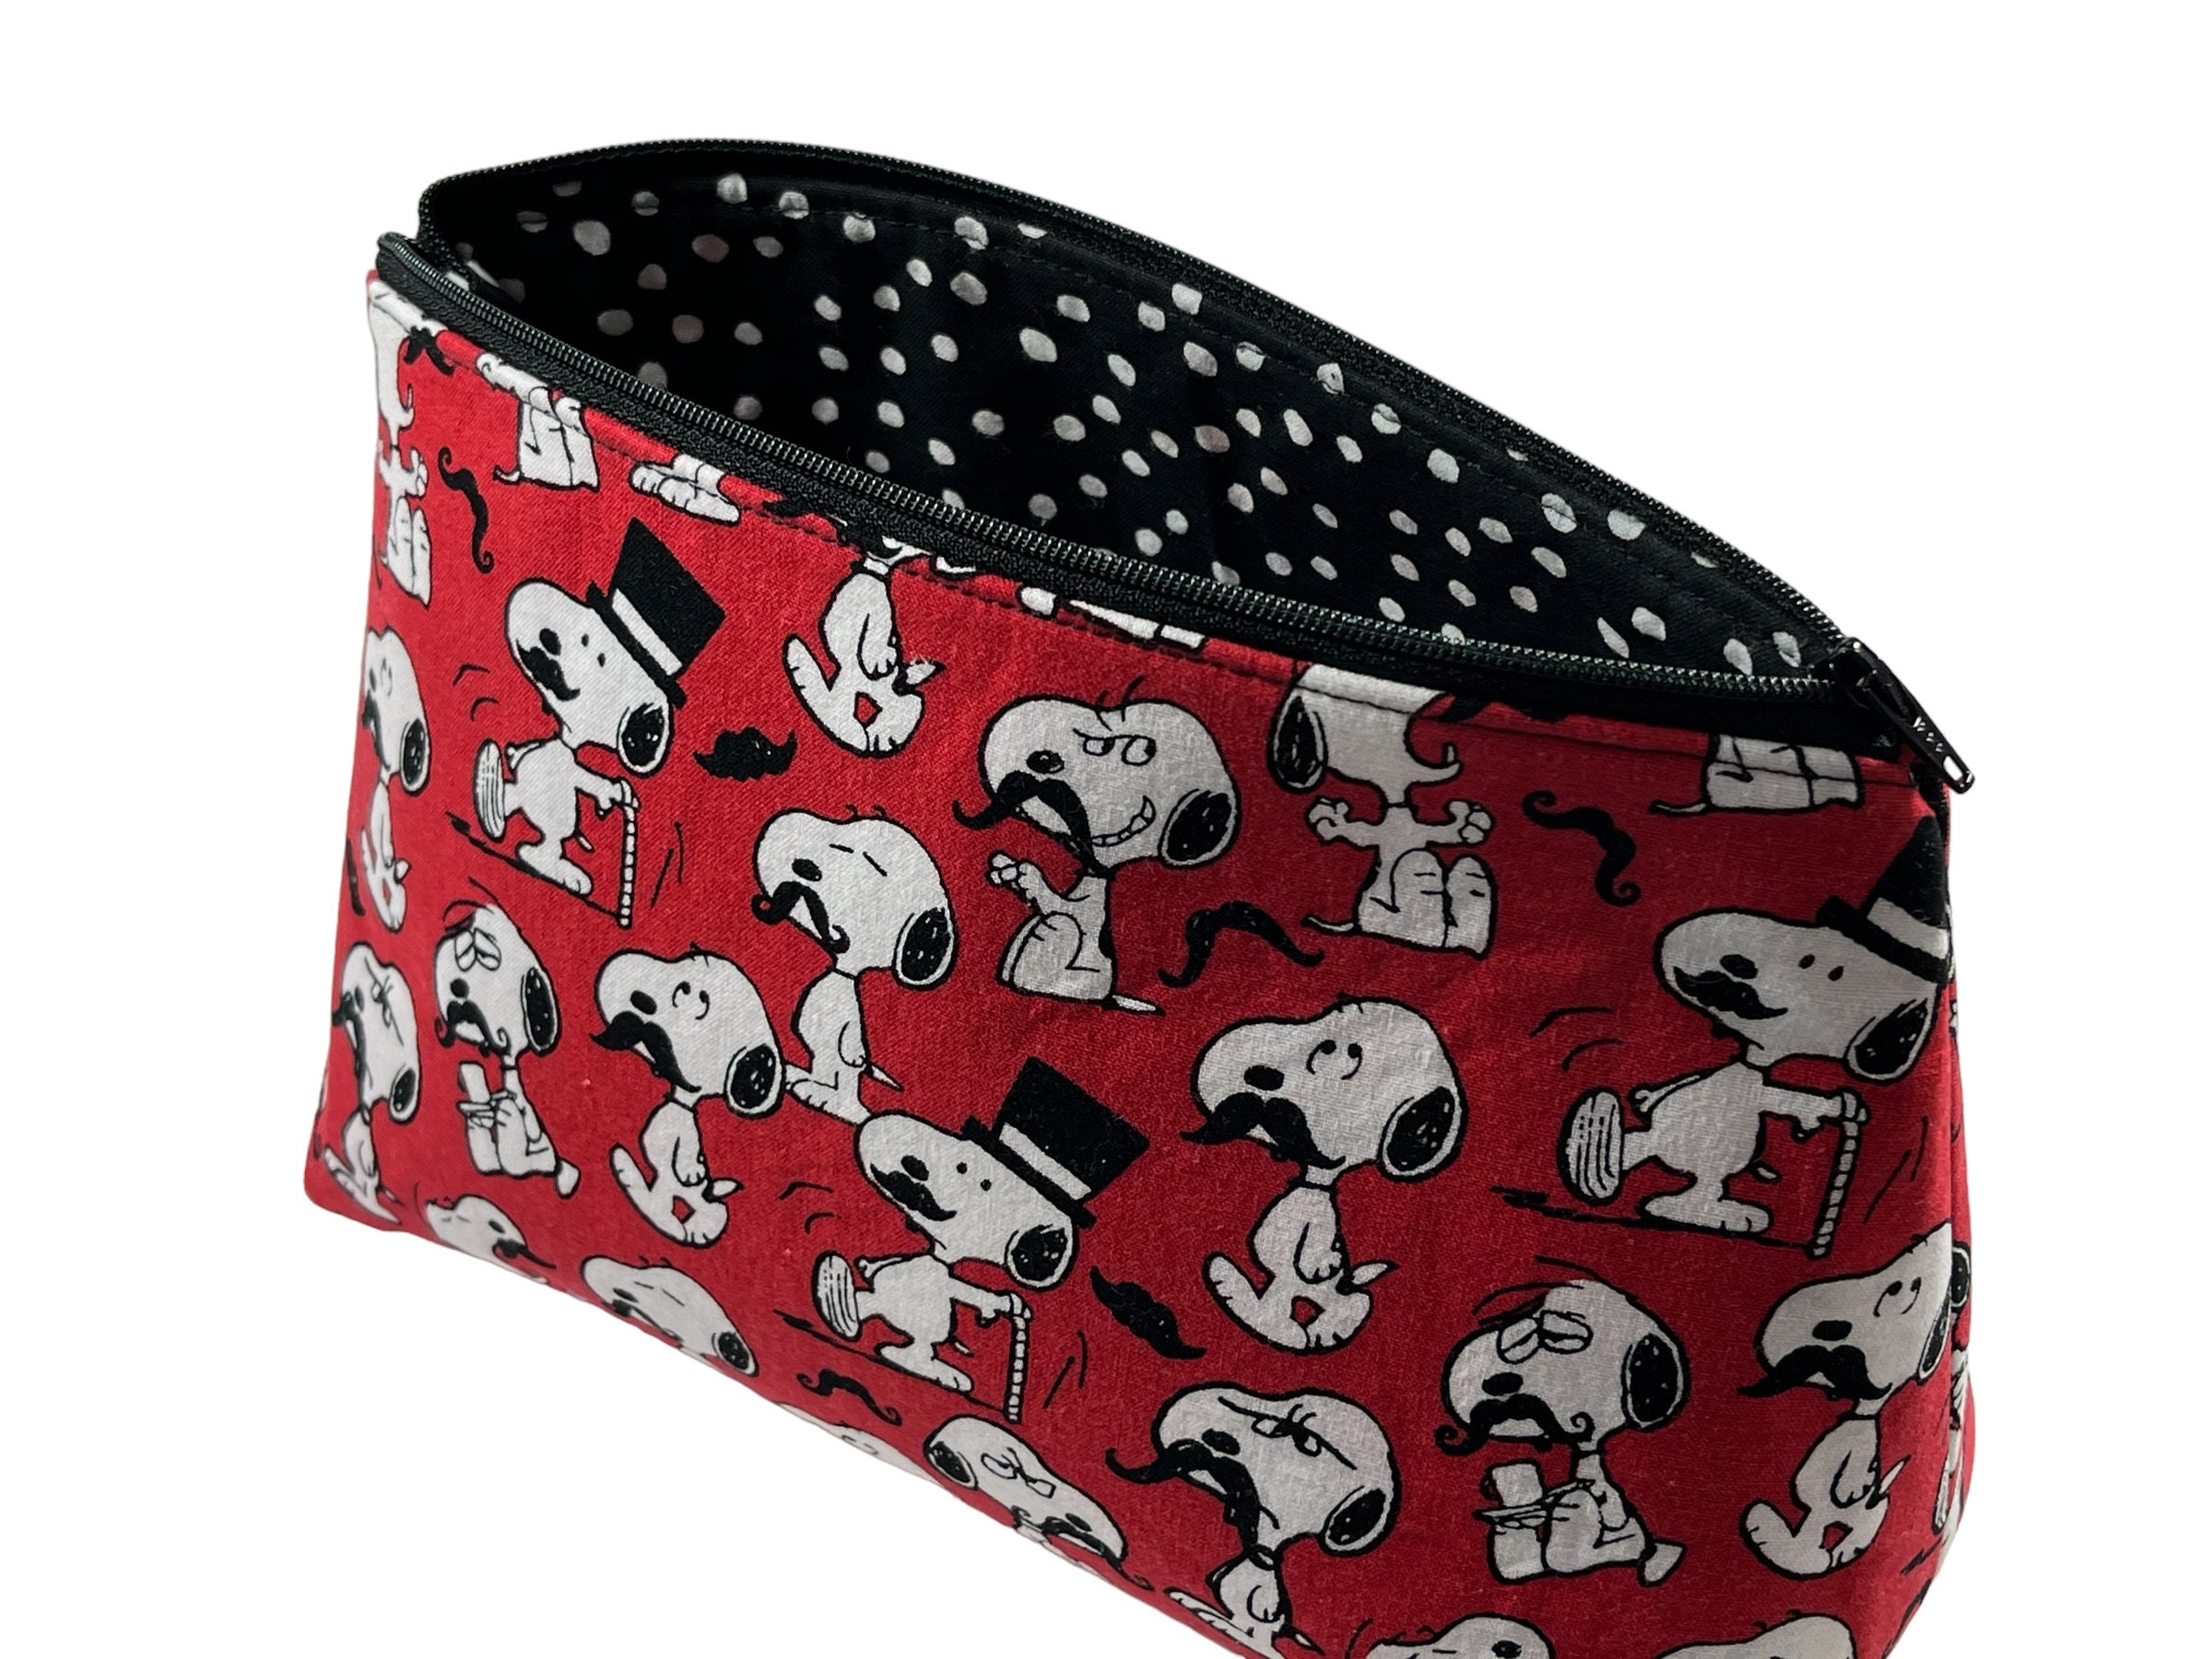 Snoopy's Mustache on Red cotton fabric Cosmetic Bag